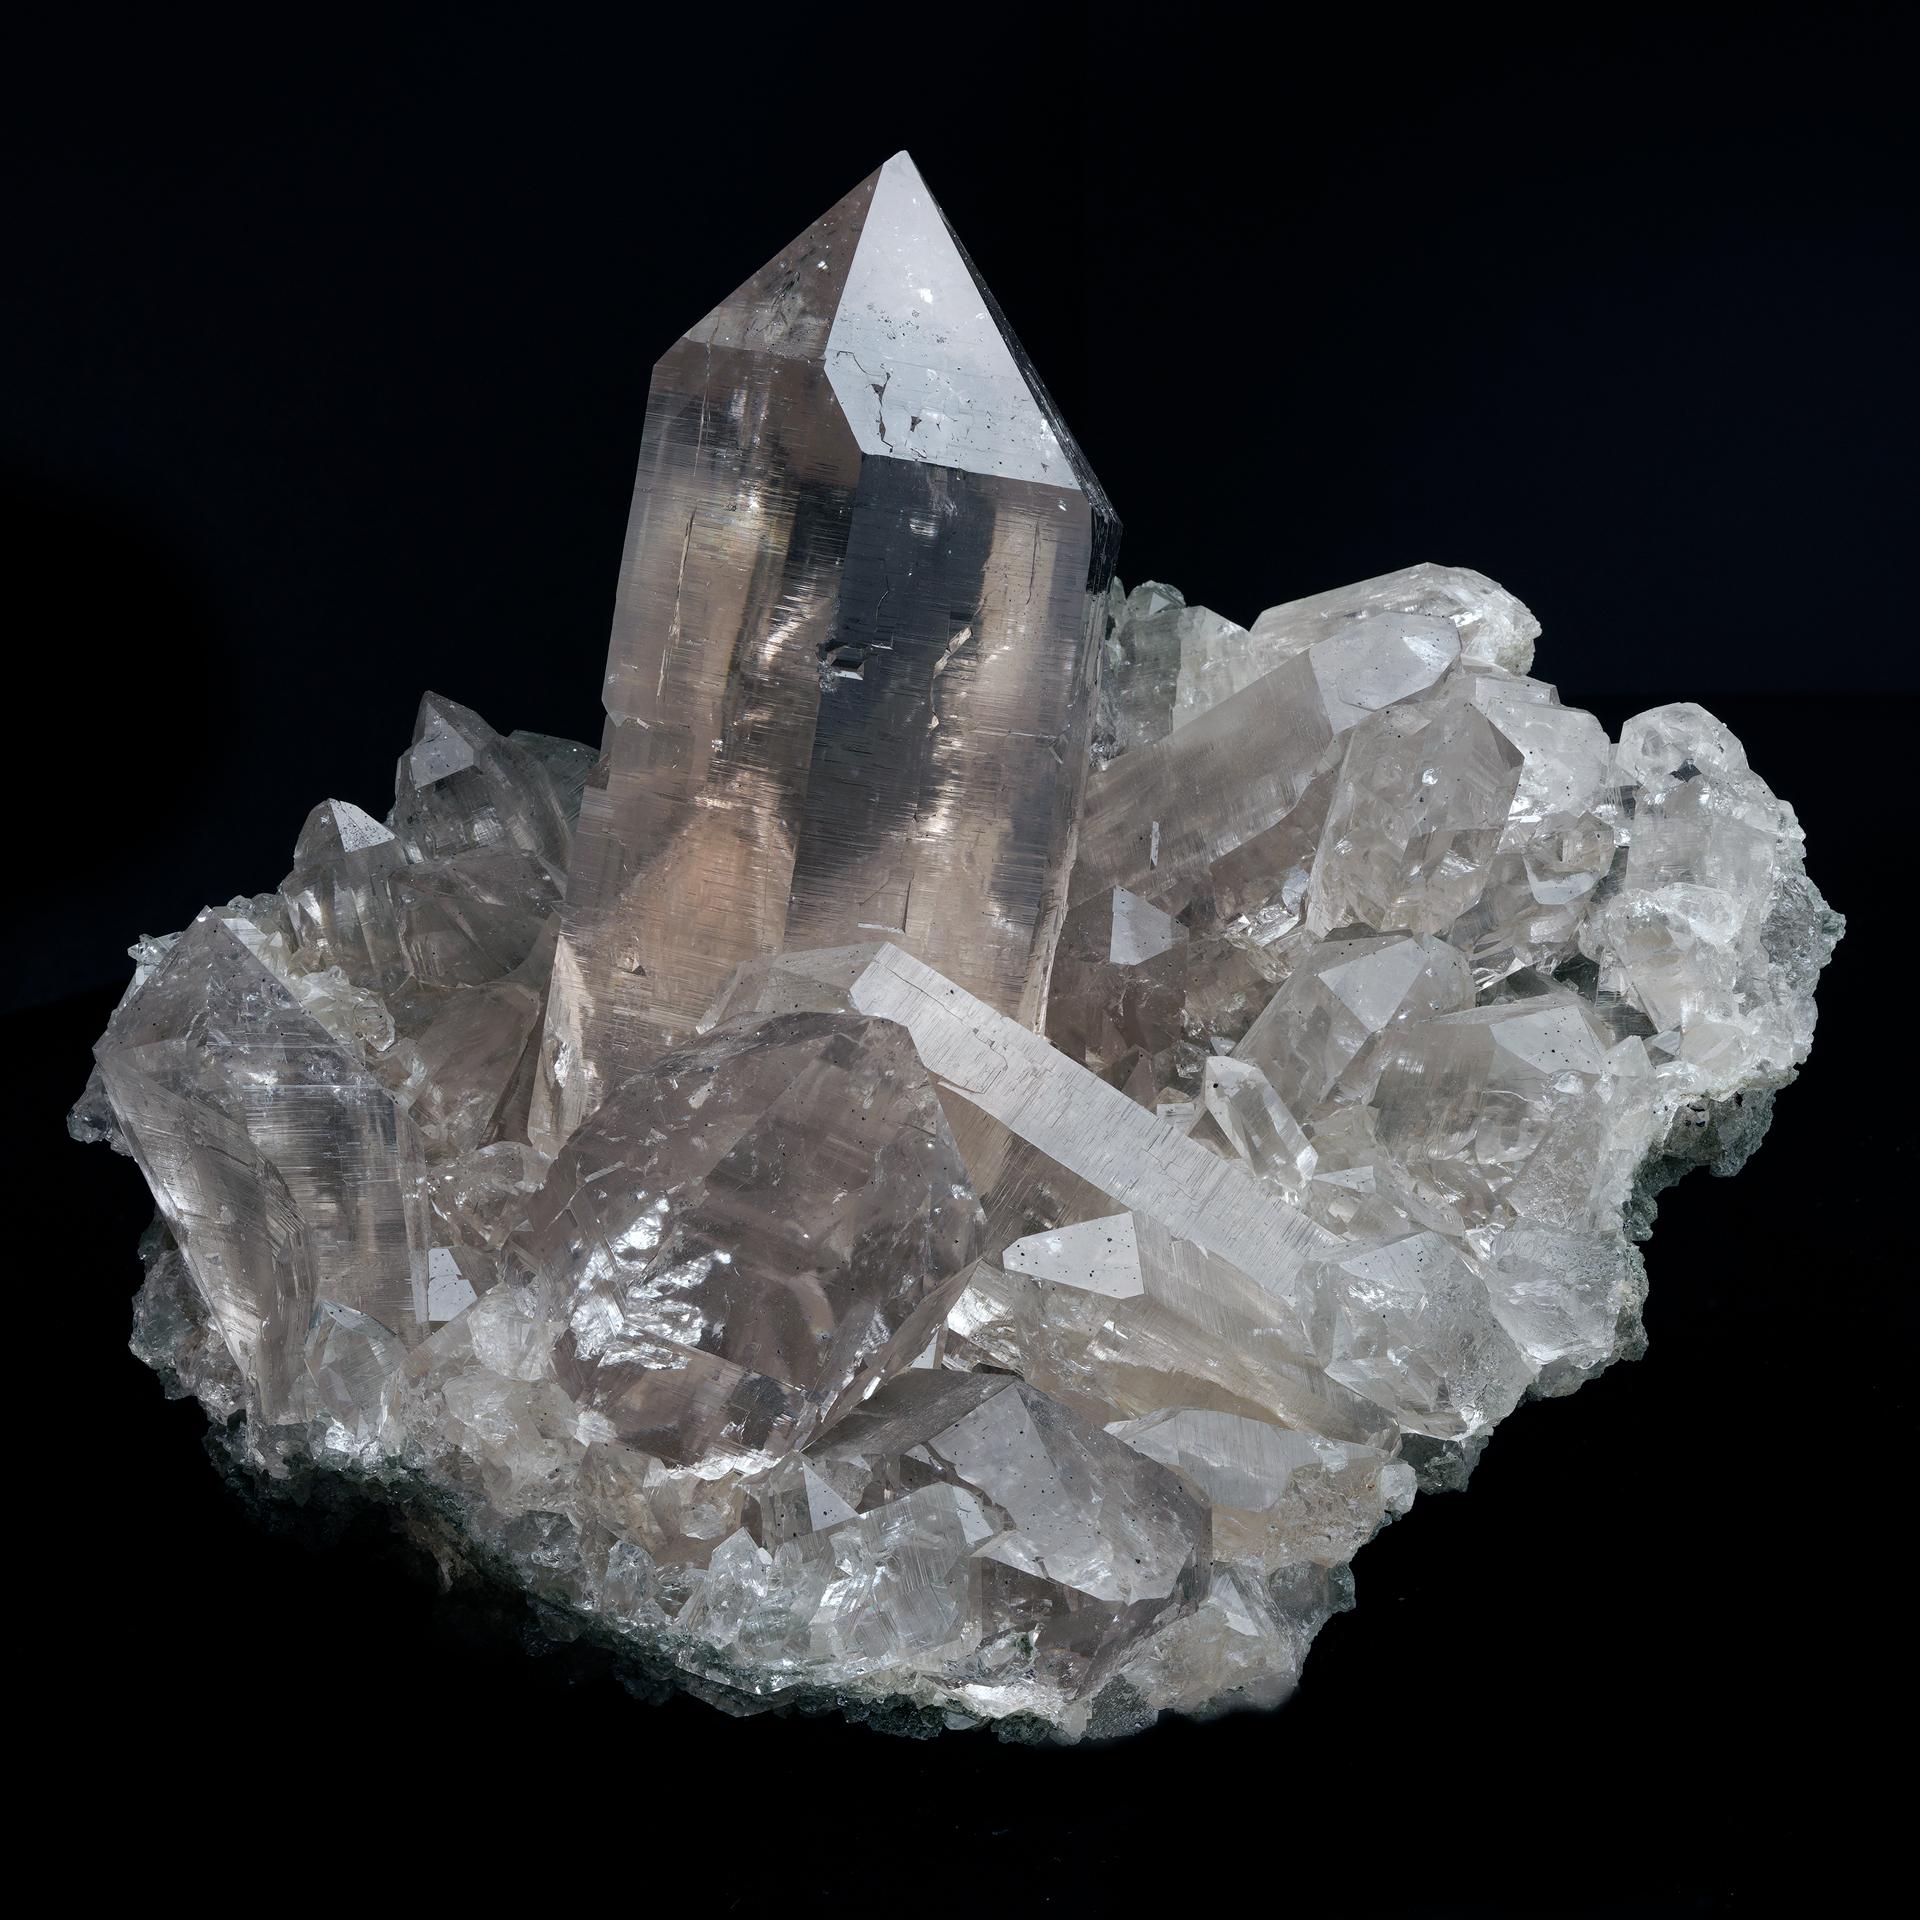 The highest quality from the heights of the Himalayas, this truly one of a kind larger than life museum quality chloride quartz cluster features a perfect 3-1/2